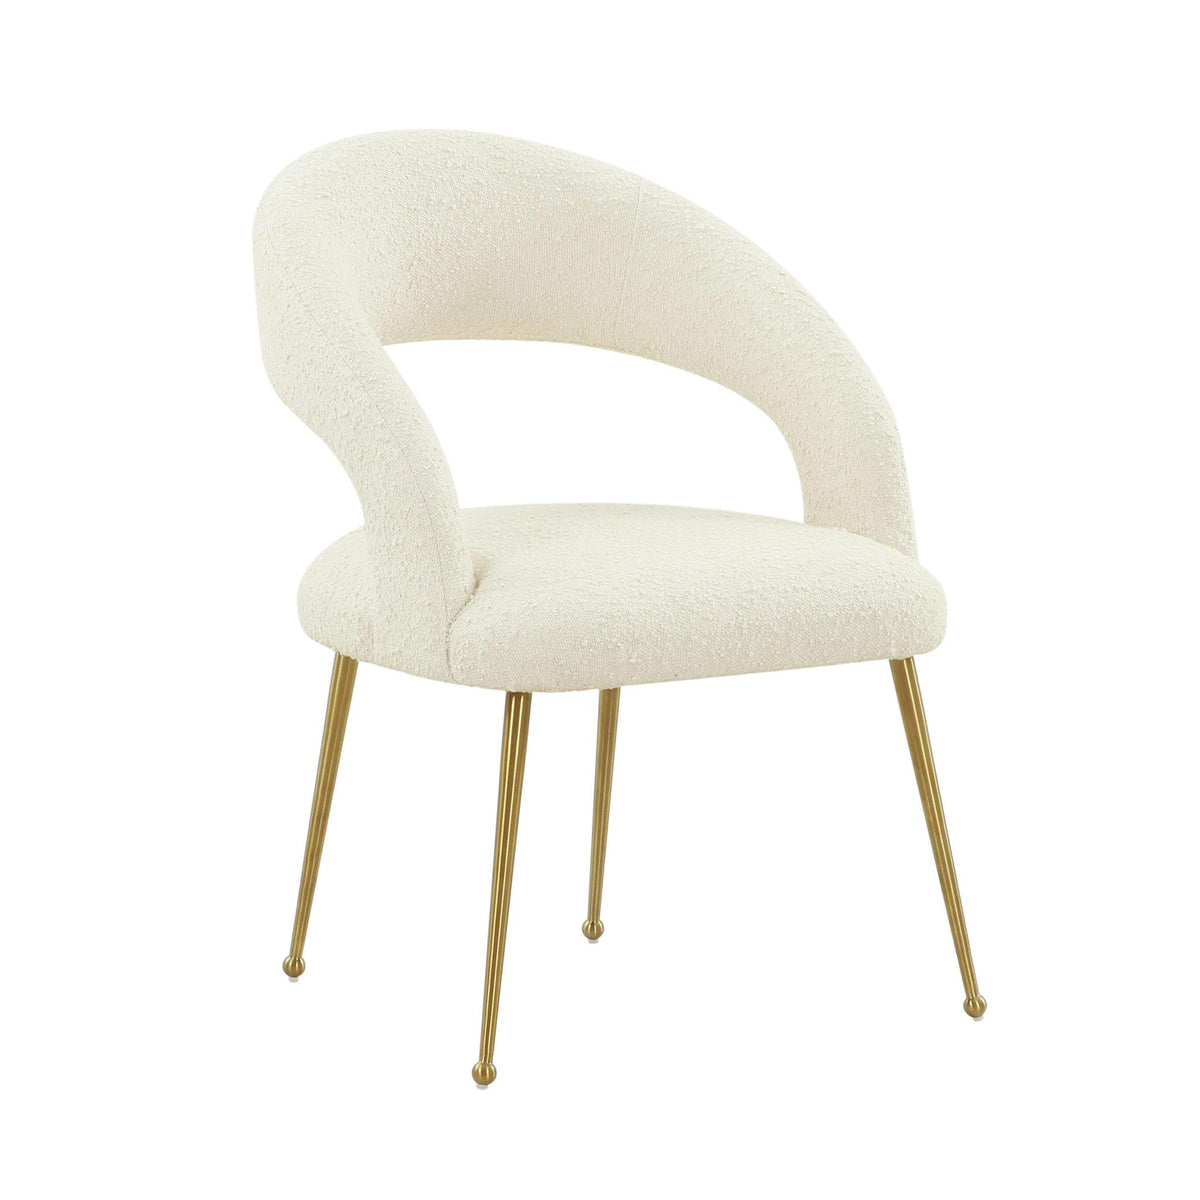 TOV Furniture Modern Rocco Cream Boucle Dining Chair - TOV-D68535